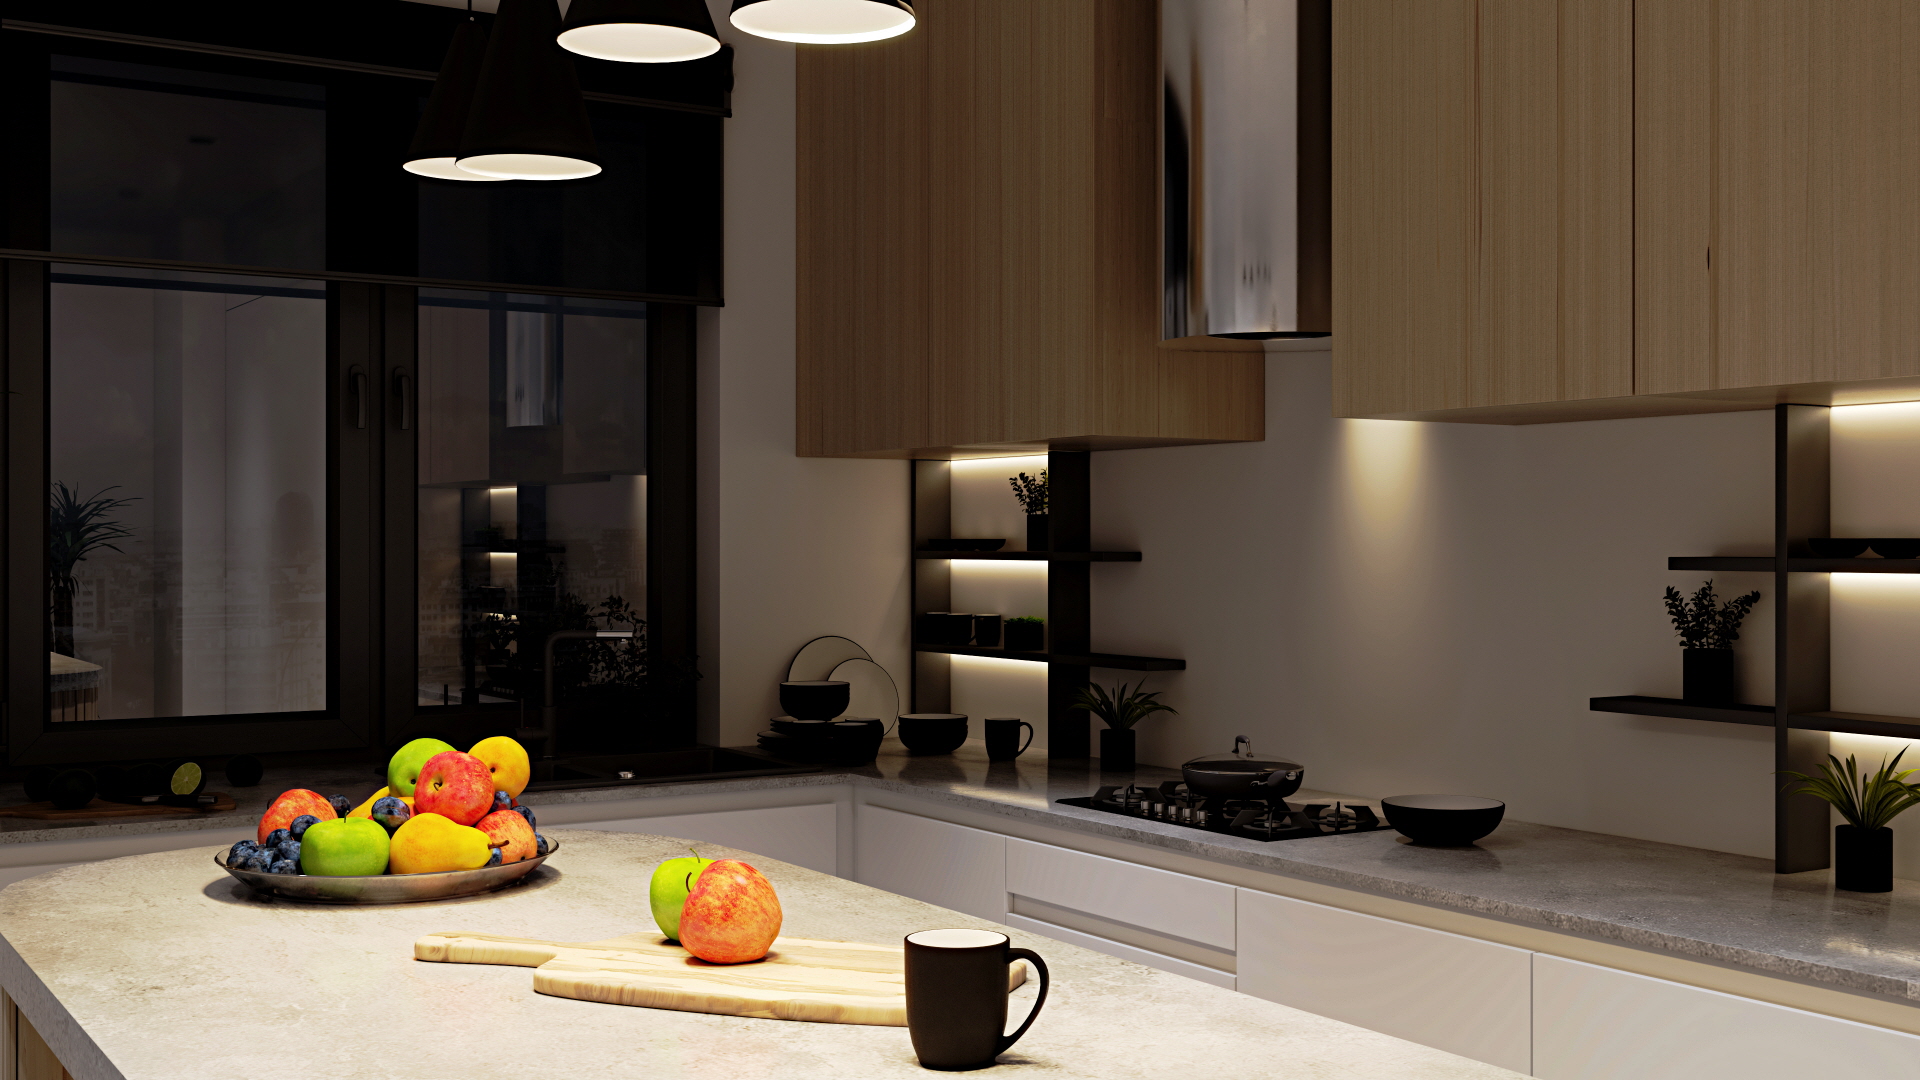 Pendant lights or LED strips add functionality and ambiance to your kitchen island, ideal for small spaces.